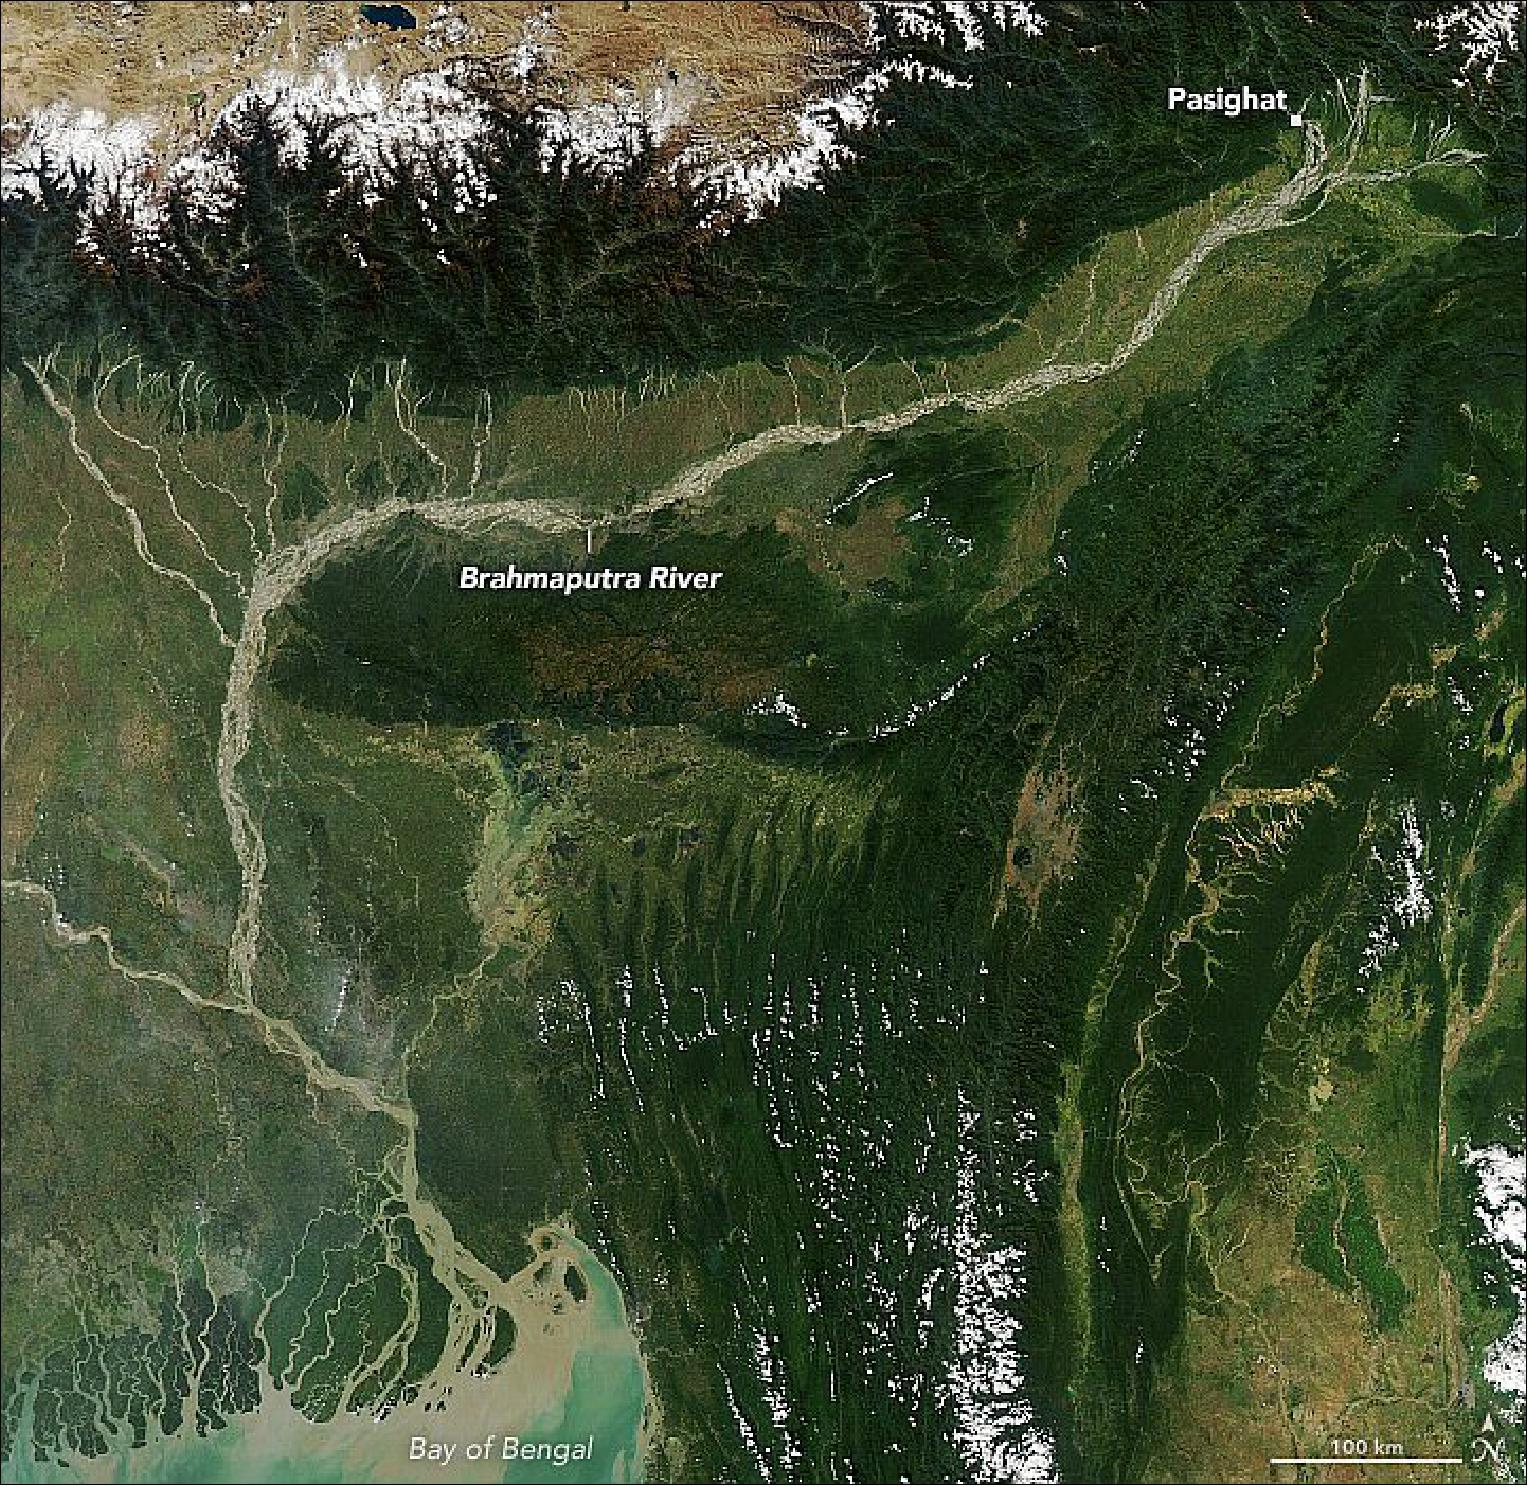 Figure 54: The river’s high sediment load contributes to the abrupt change in its shape as it exits the Himalayas and hits flatter land. The MODIS instrument on NASA’s Aqua satellite captured this natural-color image of the river on November 9, 2020. Notice how the narrow channel widens after passing the town of Pasighat, transforming into a braided river with multiple, interlacing channels. As the water slows in the flatter Brahmaputra Valley, it loses its capacity to carry sediment, depositing the excess silt in sandbars. In the course of a few kilometers, the river channel increases its width twentyfold (image credit: NASA Earth Observatory image by Lauren Dauphin, using MODIS data from NASA EOSDIS/LANCE and GIBS/Worldview. Story by Adam Voiland)